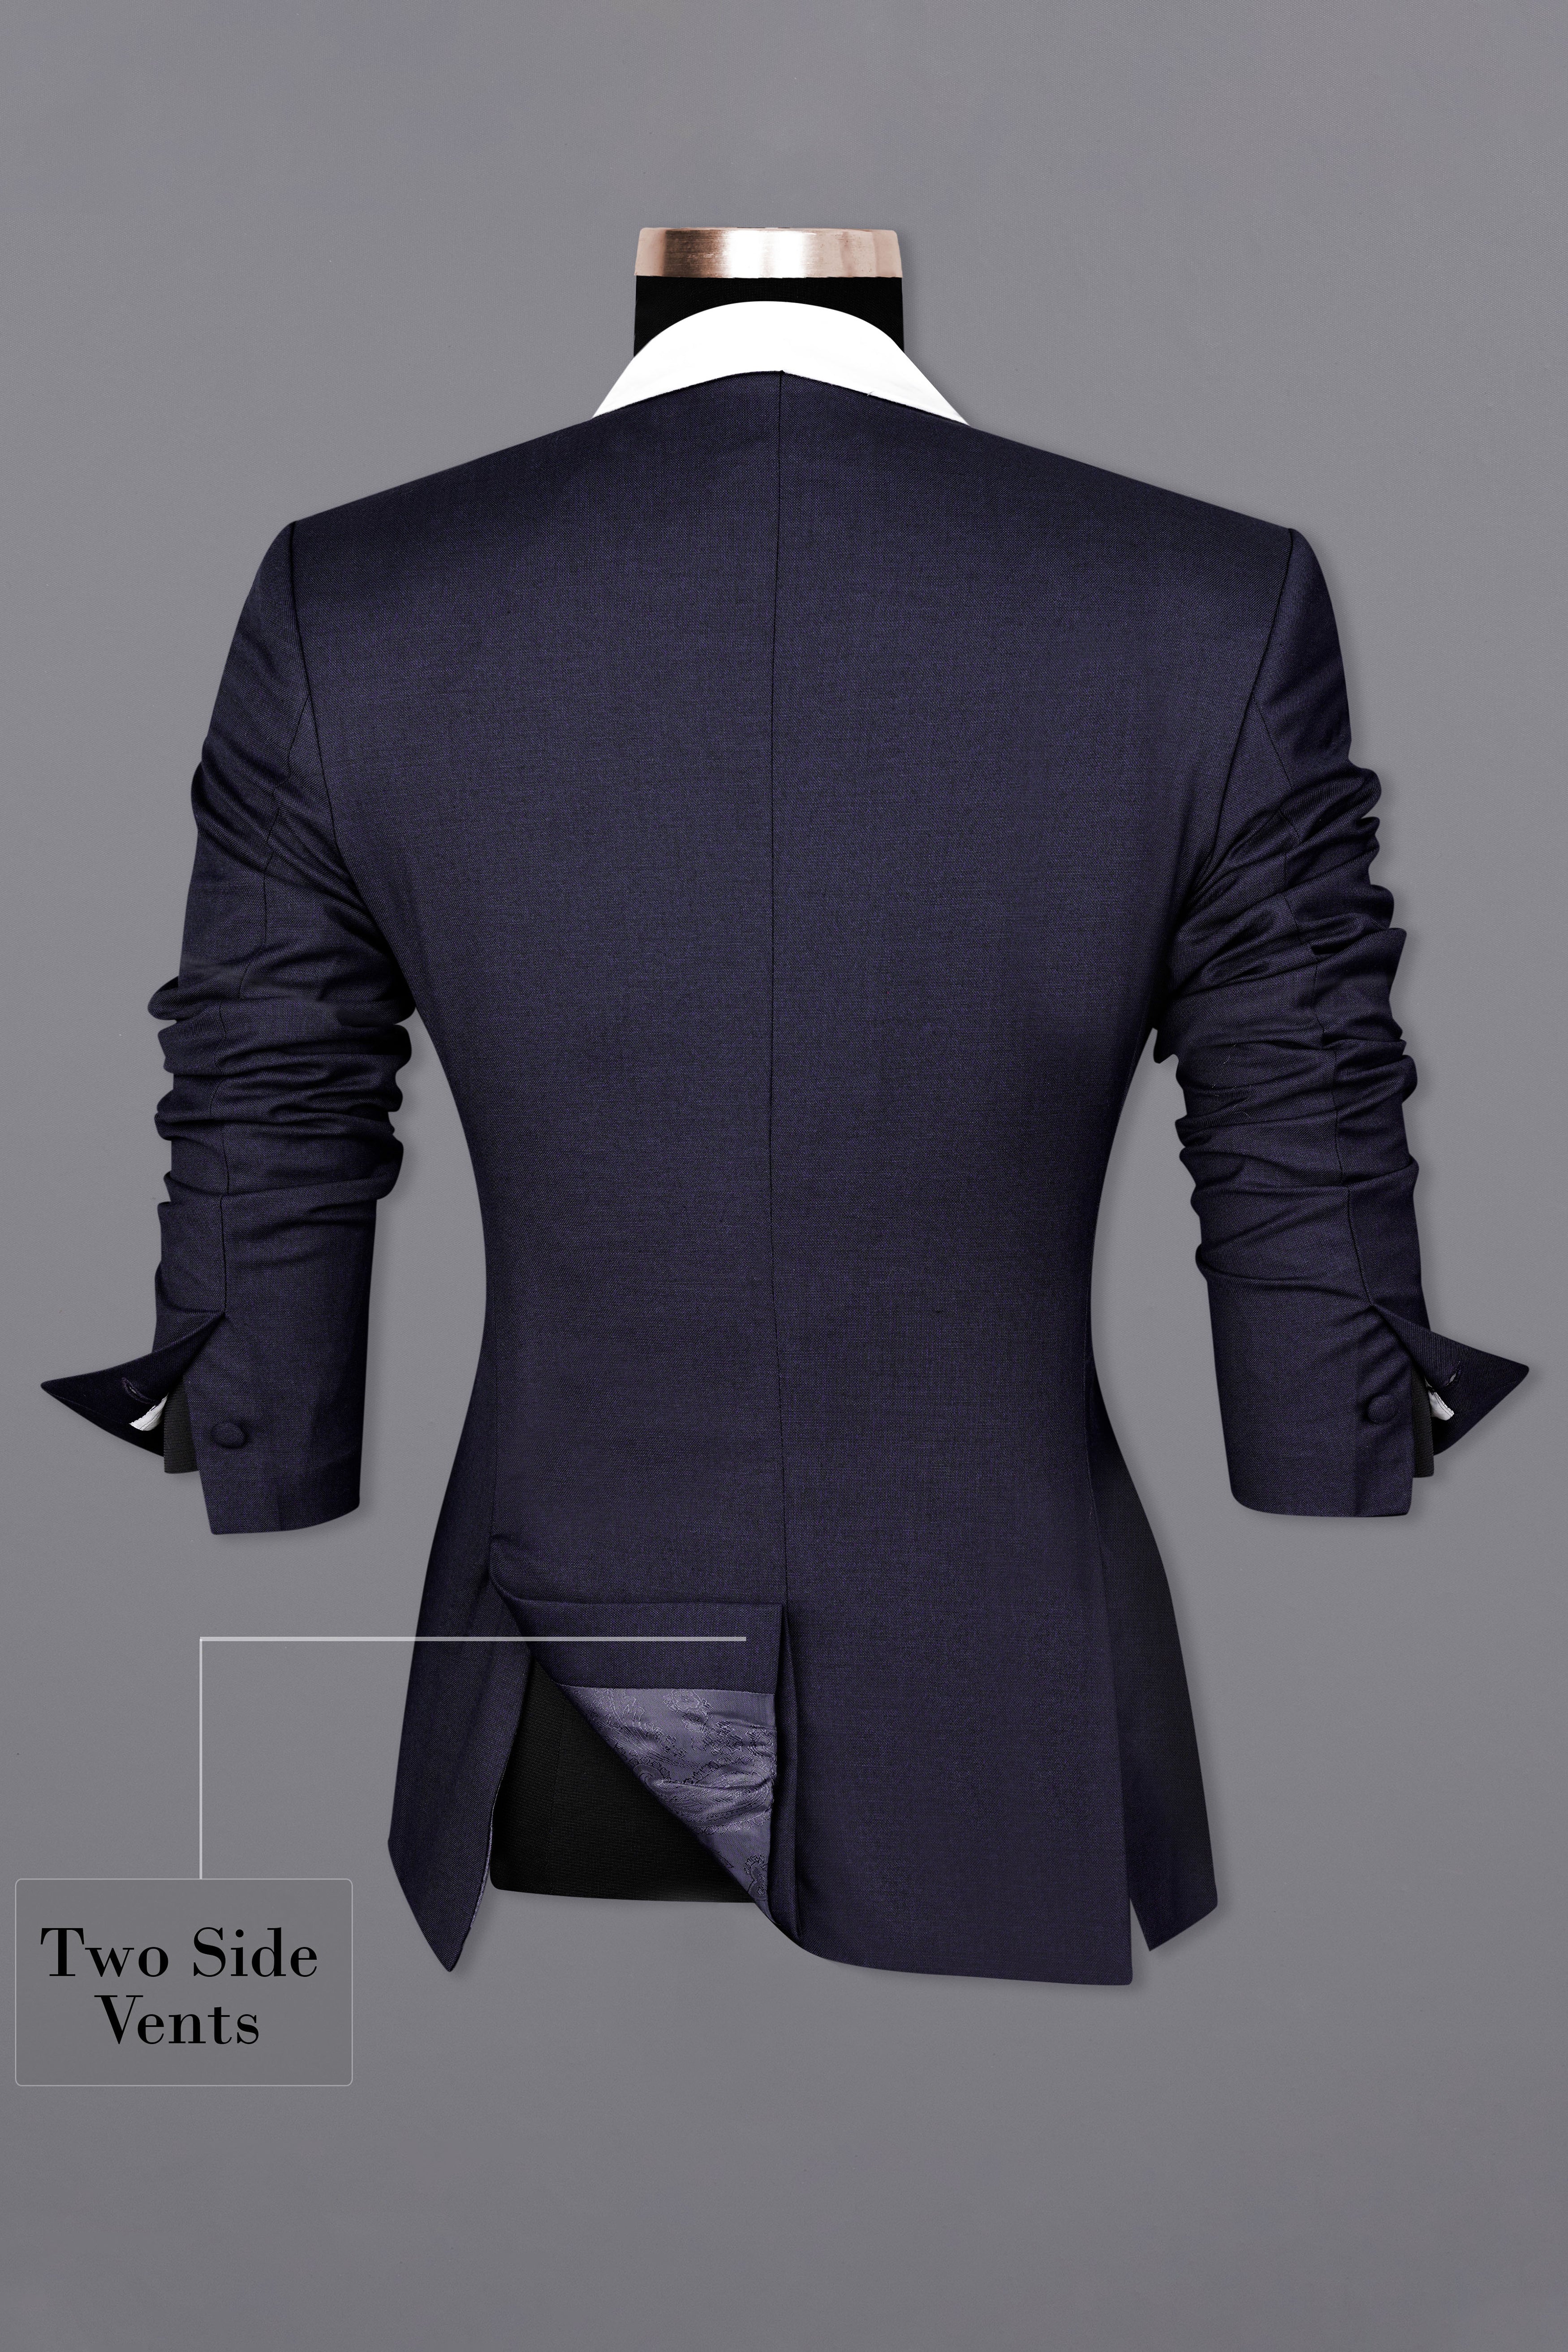 Charade Navy Blue Subtle Sheen with White Lapel Single Breasted Women's Suit